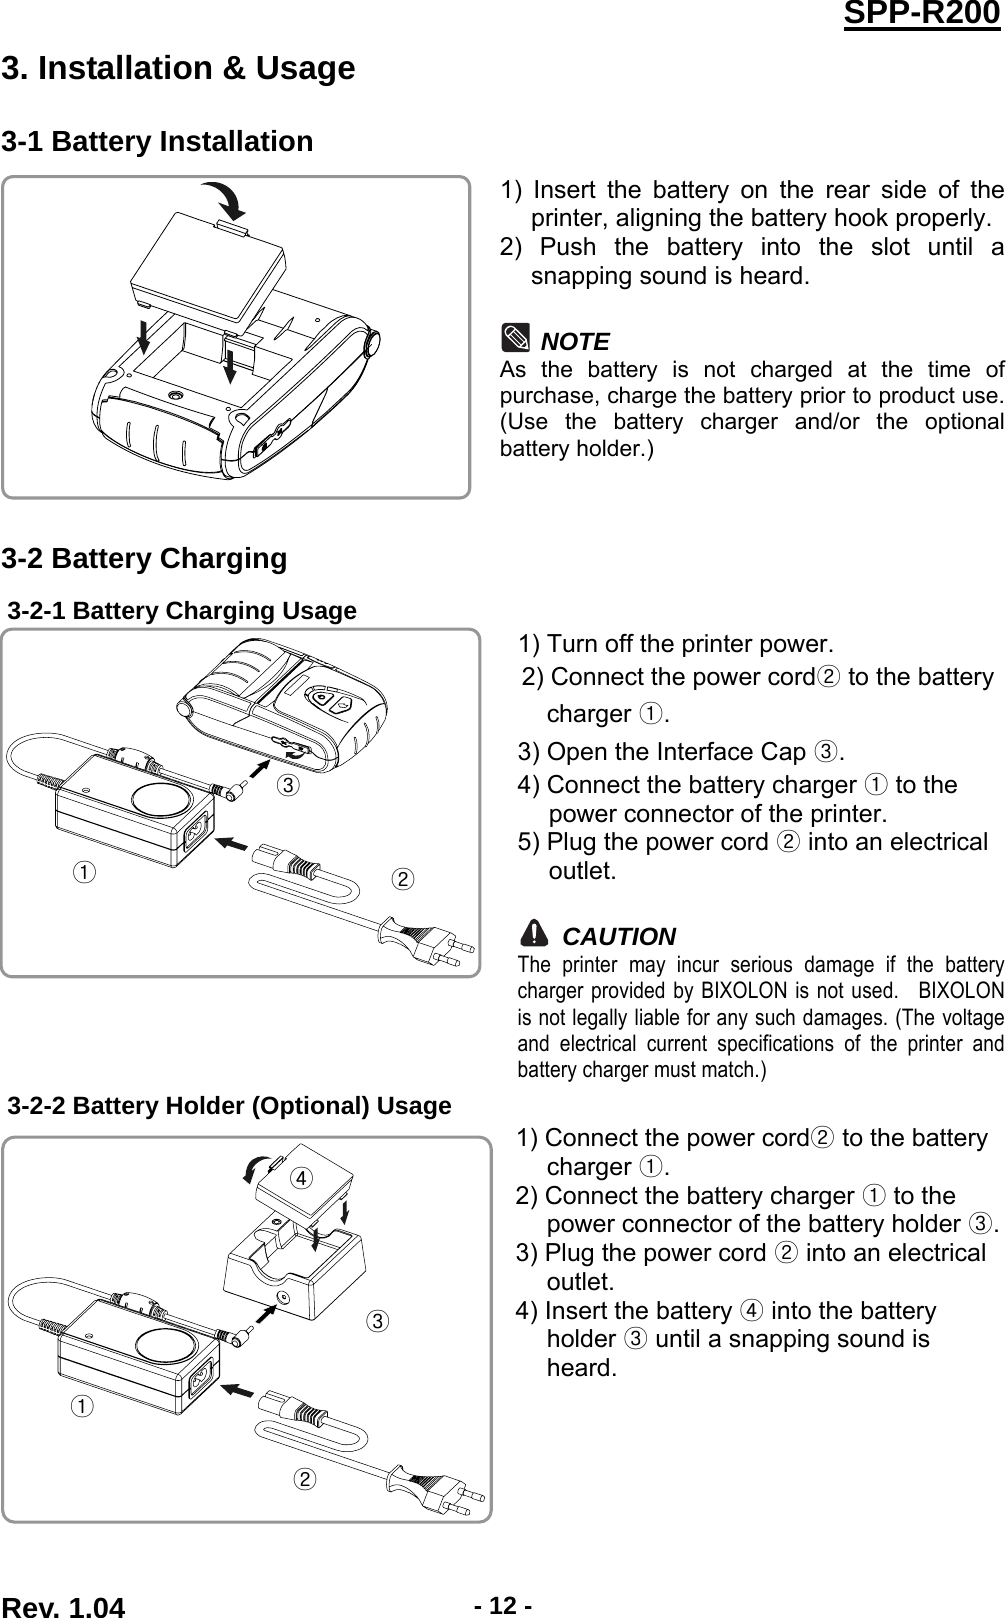  Rev. 1.04  - 12 -SPP-R2003. Installation &amp; Usage 3-1 Battery Installation 1) Insert the battery on the rear side of the printer, aligning the battery hook properly. 2) Push the battery into the slot until a snapping sound is heard.  NOTE As the battery is not charged at the time of purchase, charge the battery prior to product use. (Use the battery charger and/or the optional battery holder.)  3-2 Battery Charging 3-2-1 Battery Charging Usage  1) Turn off the printer power. 2) Connect the power cord to the battery charger . 3) Open the Interface Cap . 4) Connect the battery charger  to the power connector of the printer. 5) Plug the power cord  into an electrical outlet.  CAUTION The printer may incur serious damage if the battery charger provided by BIXOLON is not used.  BIXOLON is not legally liable for any such damages. (The voltage and electrical current specifications of the printer and battery charger must match.) 3-2-2 Battery Holder (Optional) Usage 1) Connect the power cord  to the battery charger . 2) Connect the battery charger   to the power connector of the battery holder  .3) Plug the power cord   into an electrical outlet. 4) Insert the battery   into the battery holder   until a snapping sound is heard.          